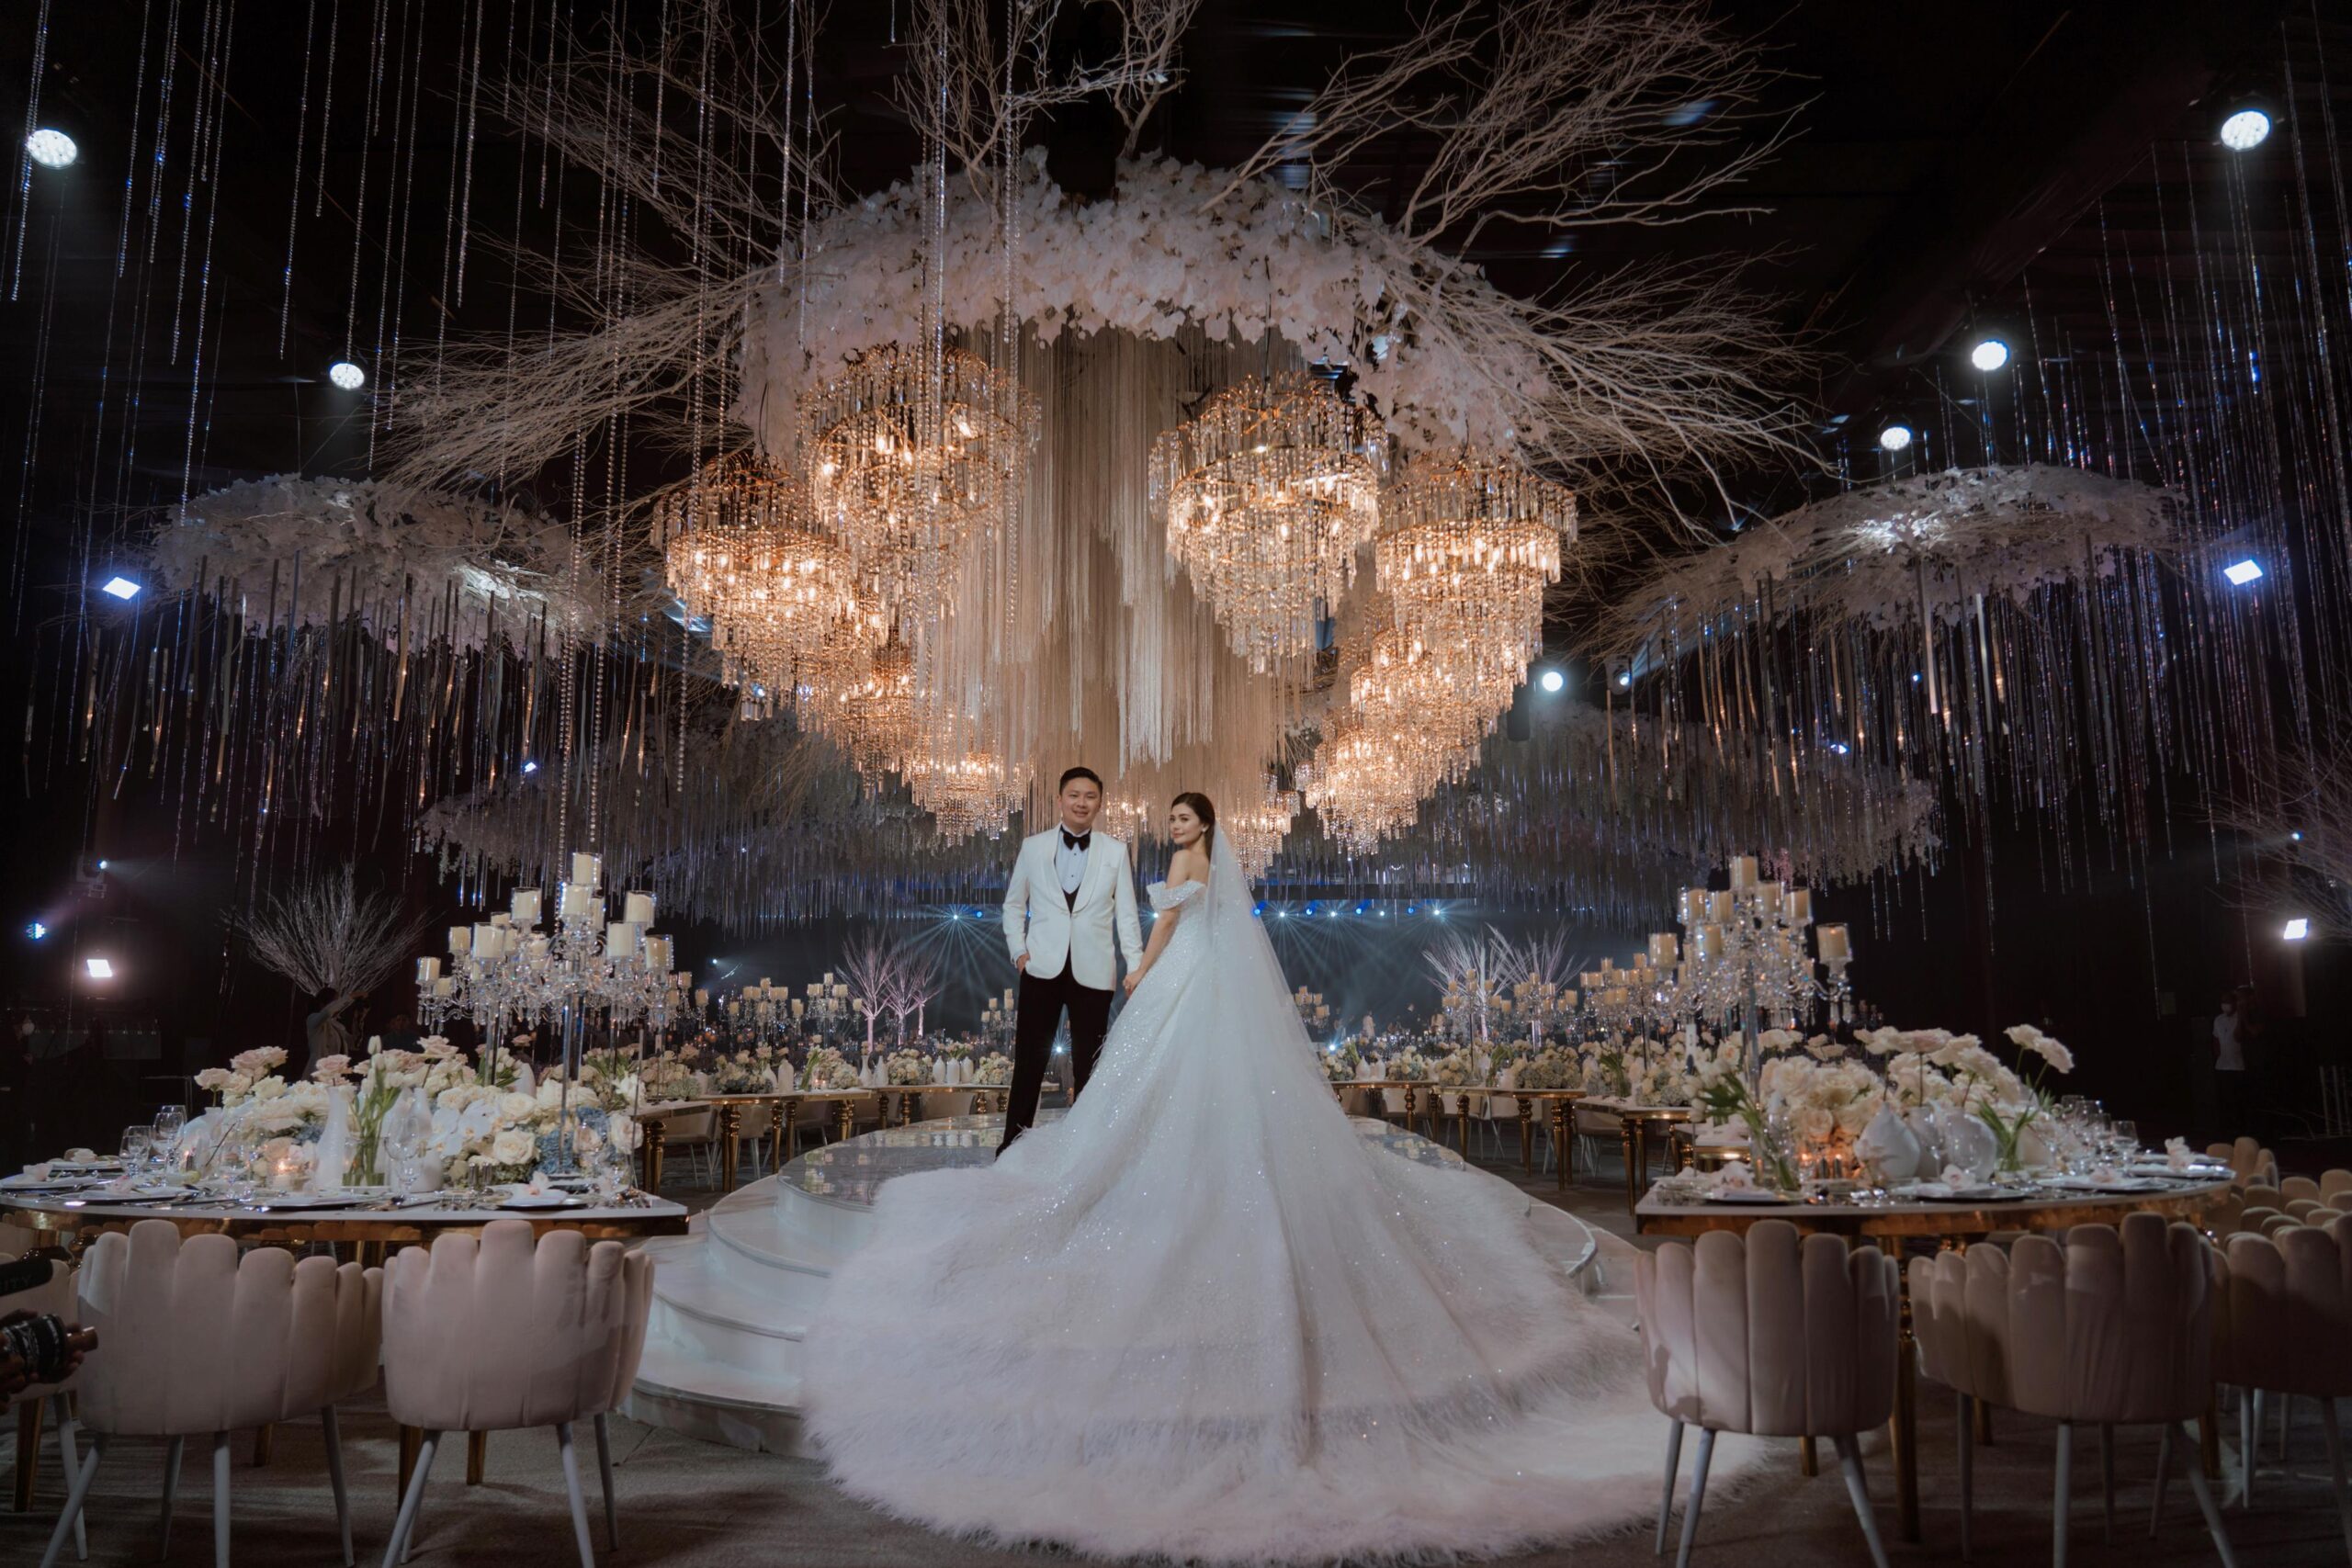 Verniece Enciso and Alfred Dichaves grand wedding was a winter wonderland